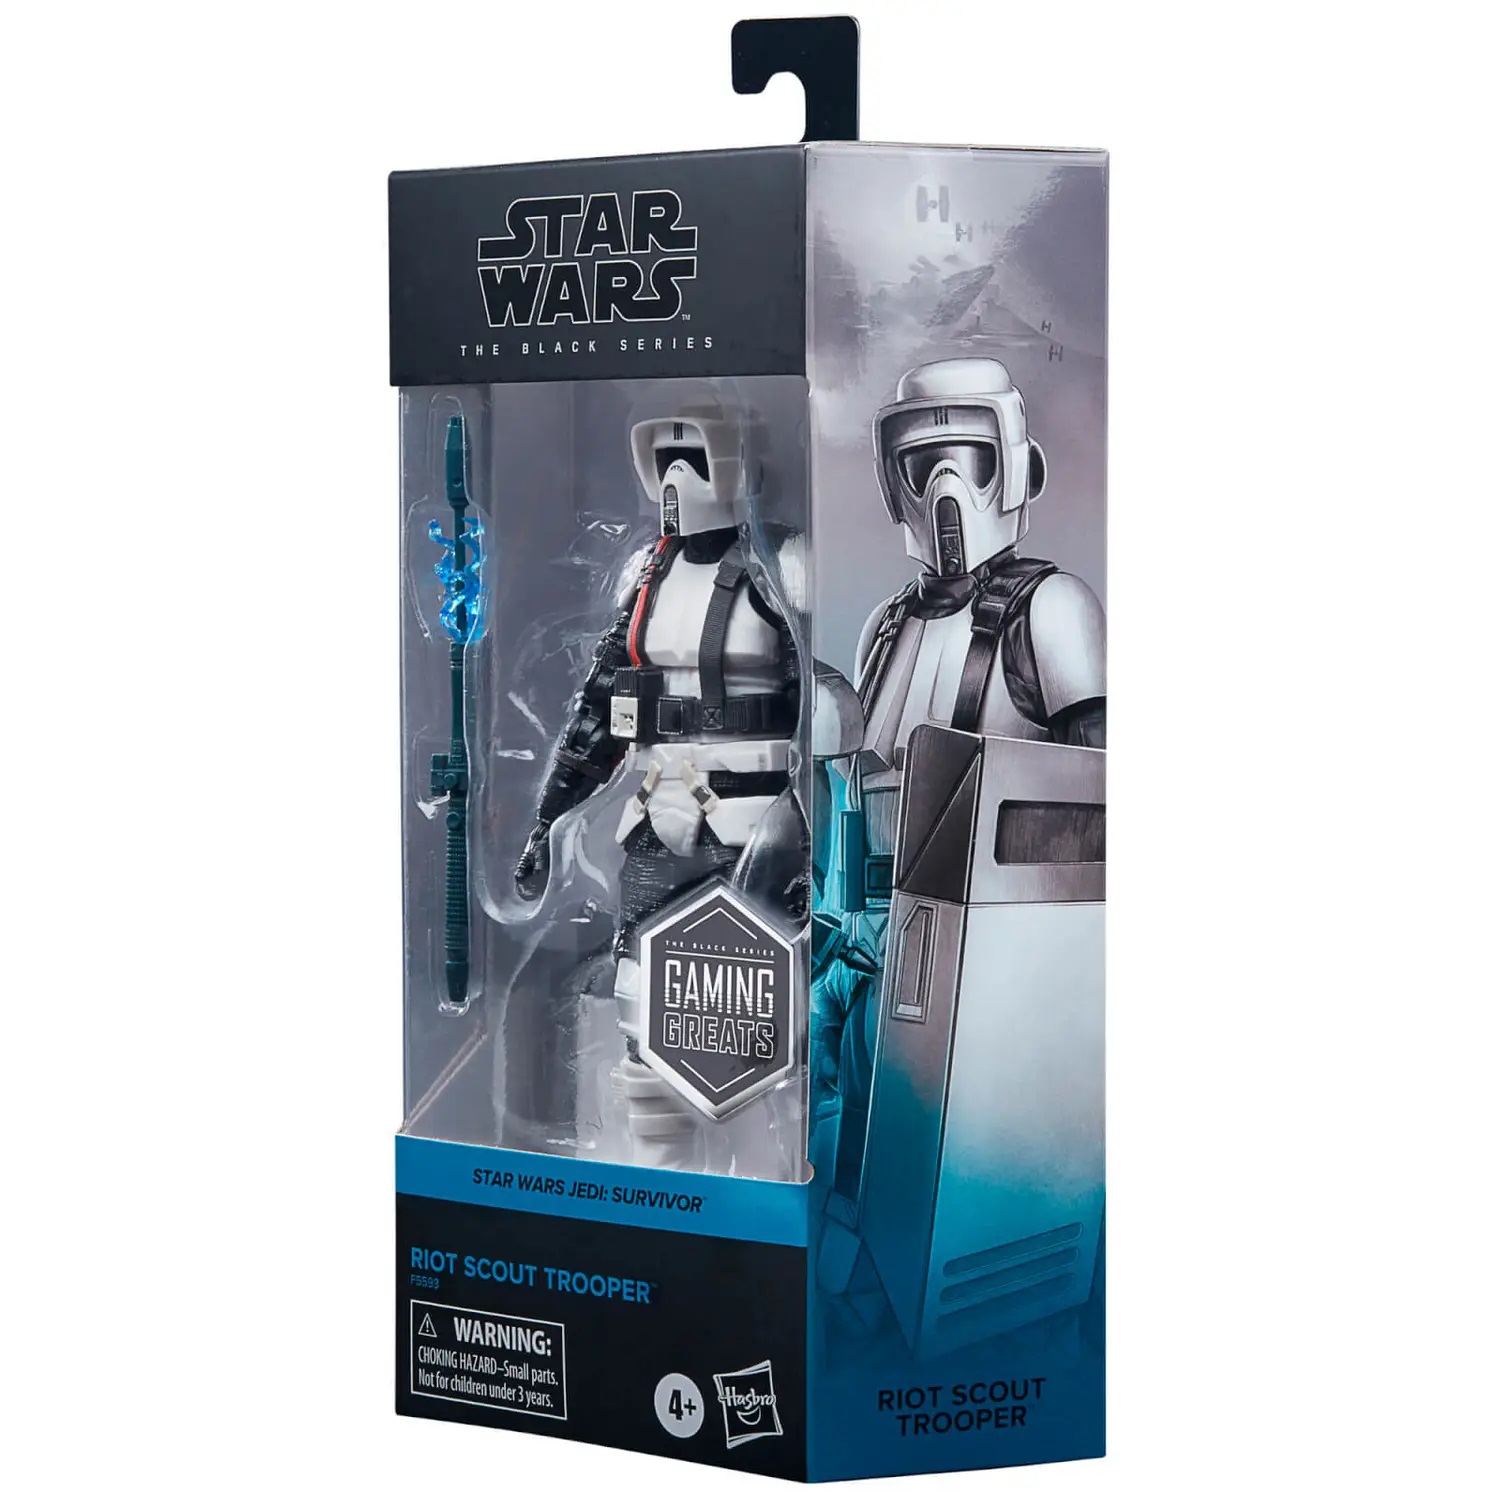 Star Wars The Black Series Gaming Greats Riot Scout Trooper f5593 